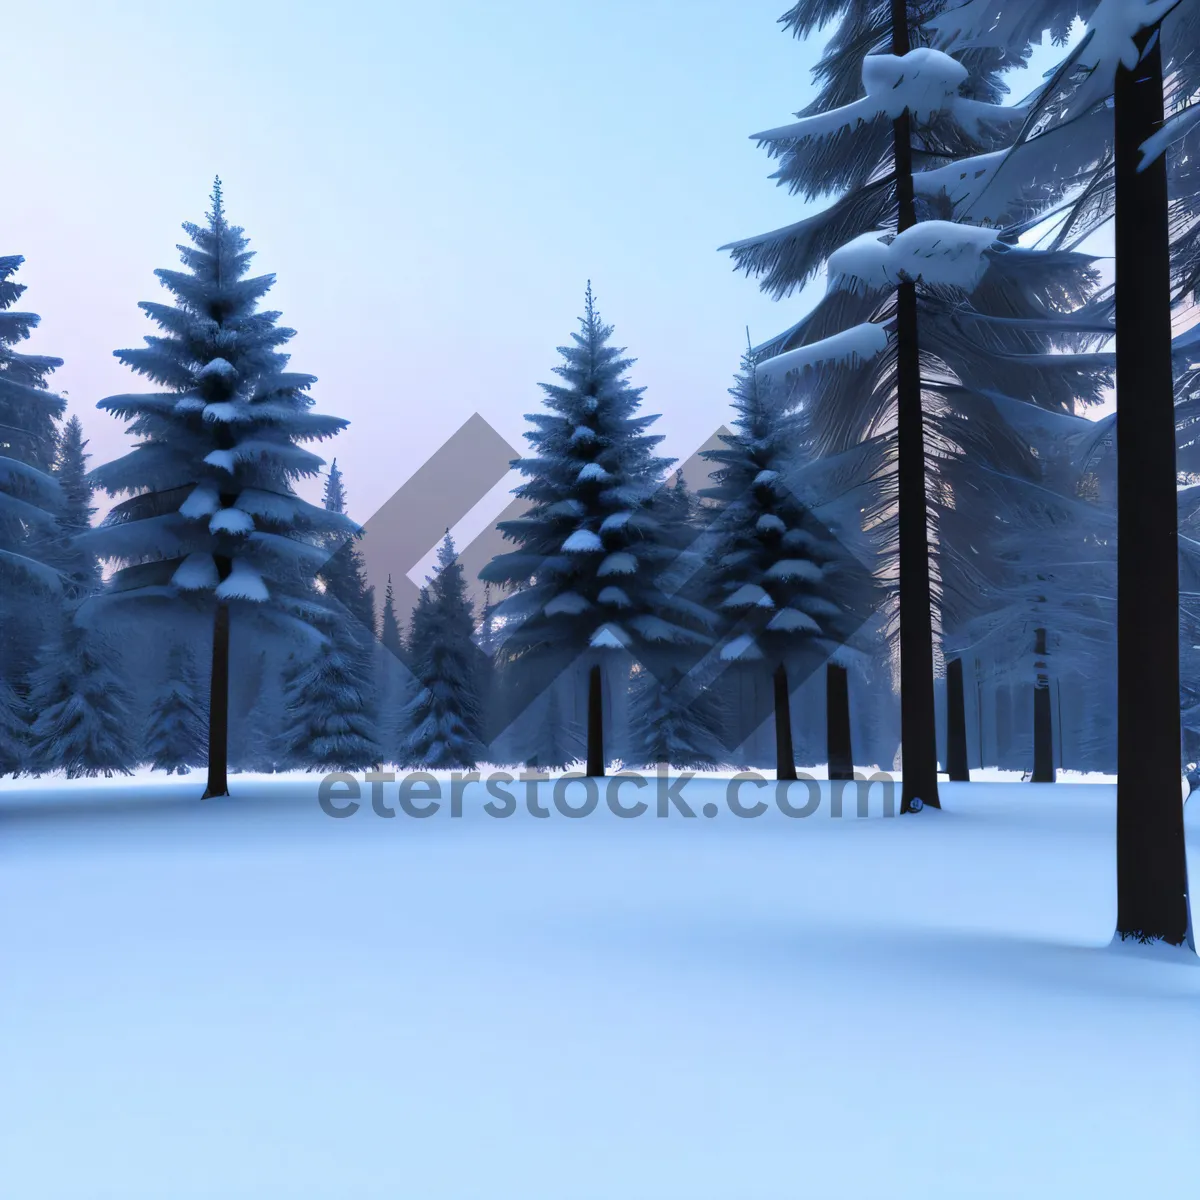 Picture of Winter Wonderland: Majestic Snowy Fir Forest